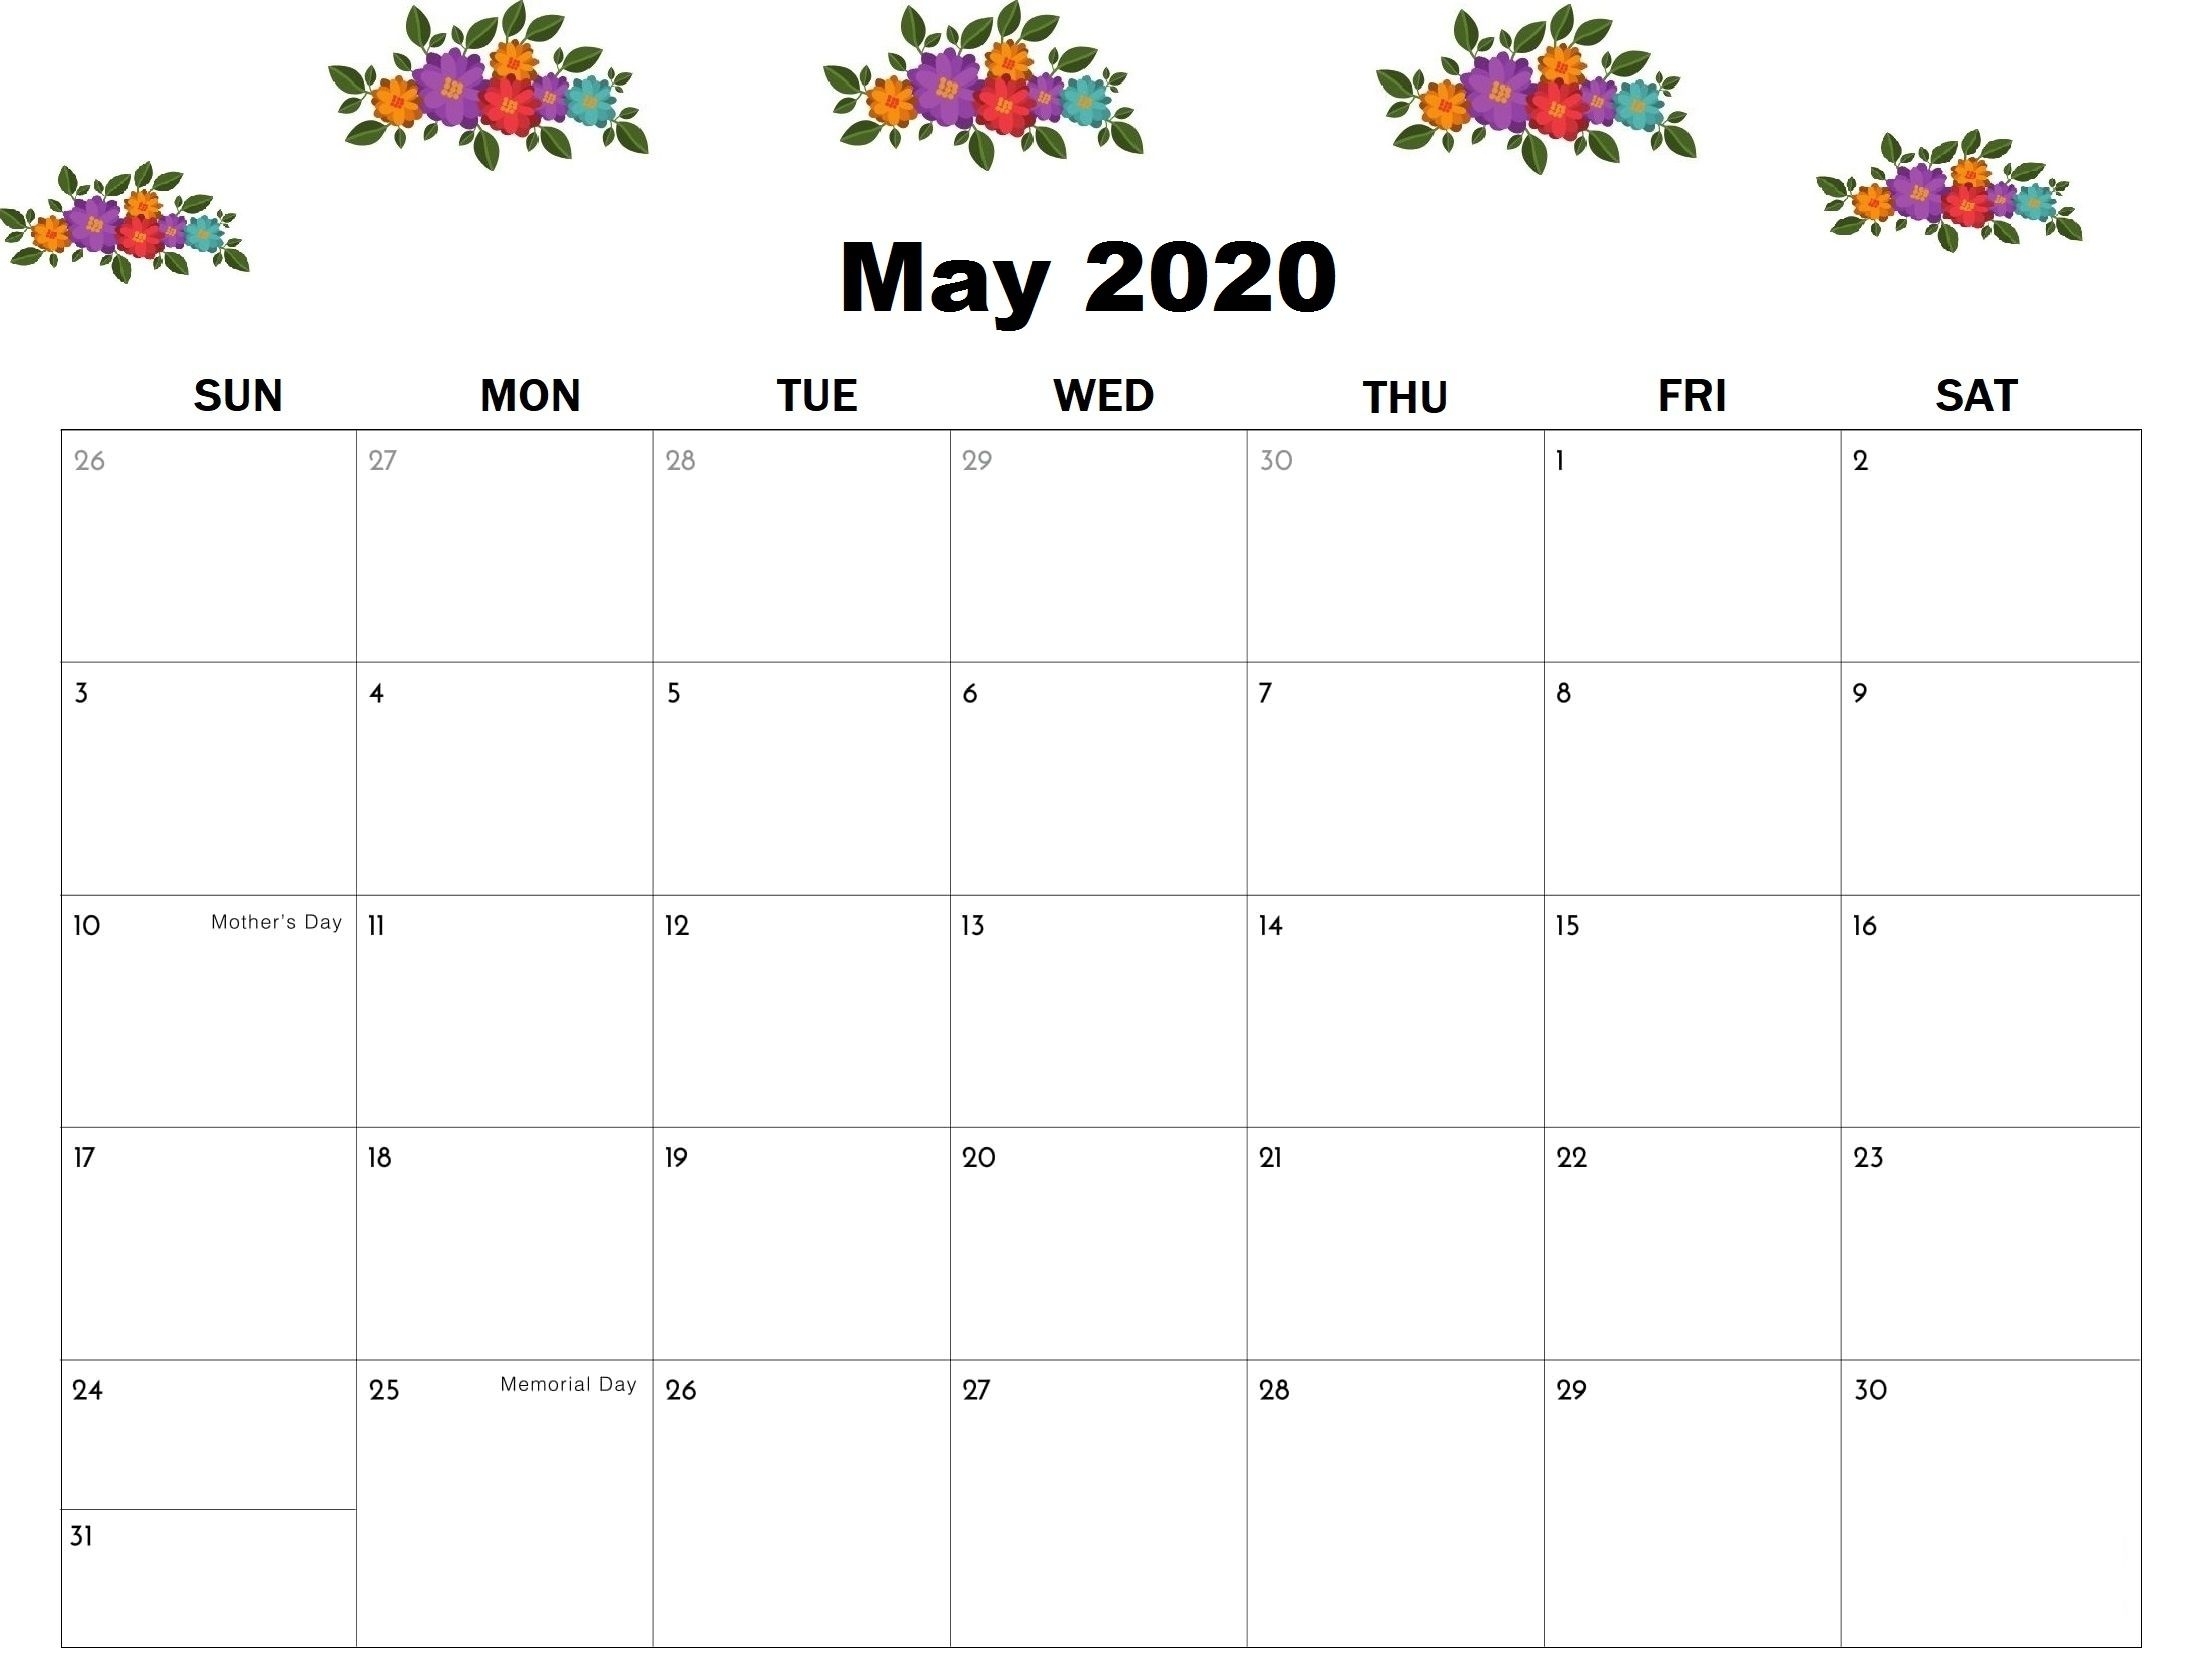 You Can Add Your Upcoming Holidays In May 2020 Calendar